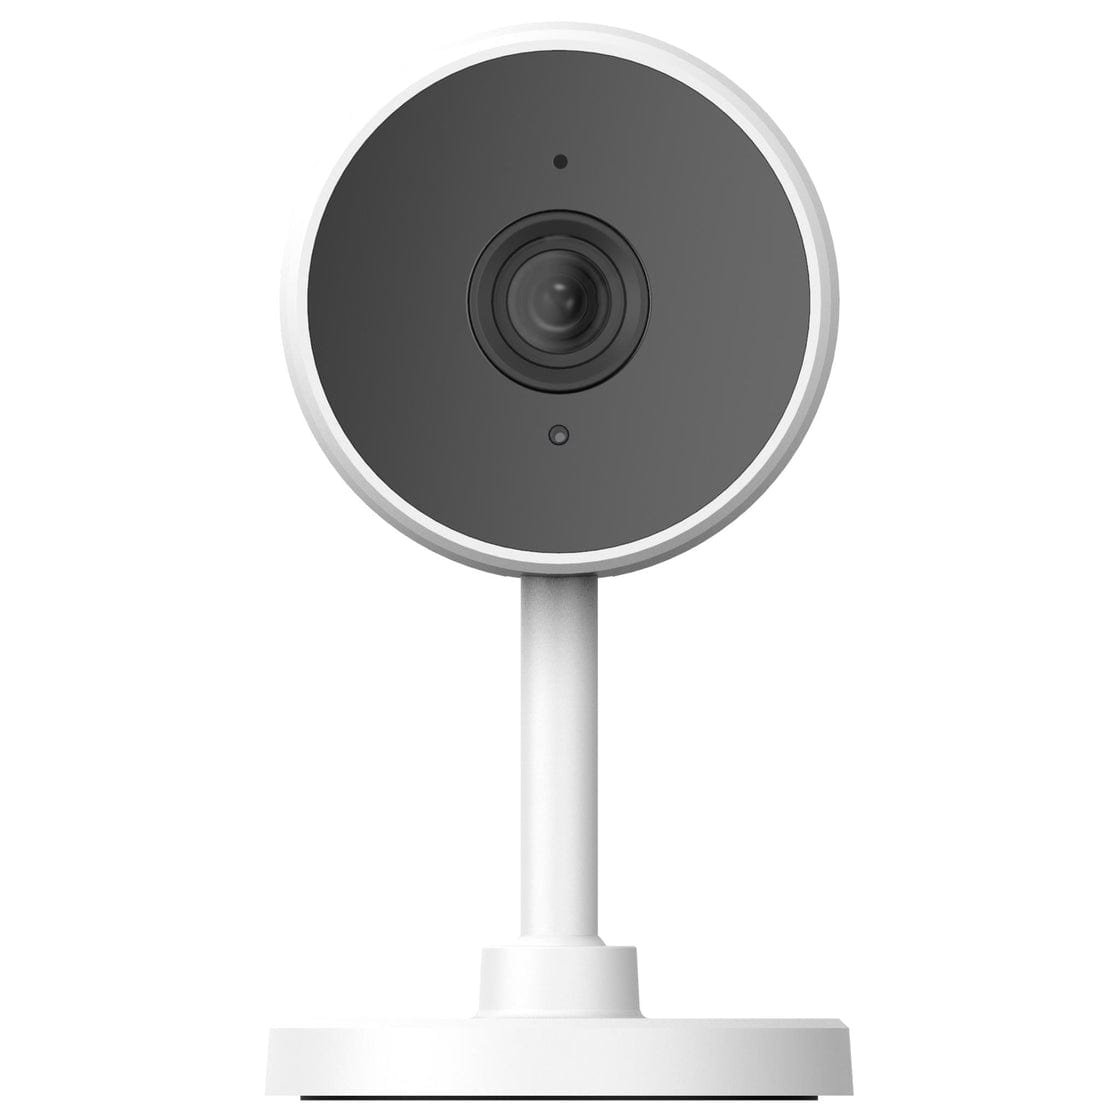 Smart Indoor WIFI Camera with Night Vision, Motion Detection & 2-Way Audio | Supply Master | Accra, Ghana Safety & Security Buy Tools hardware Building materials